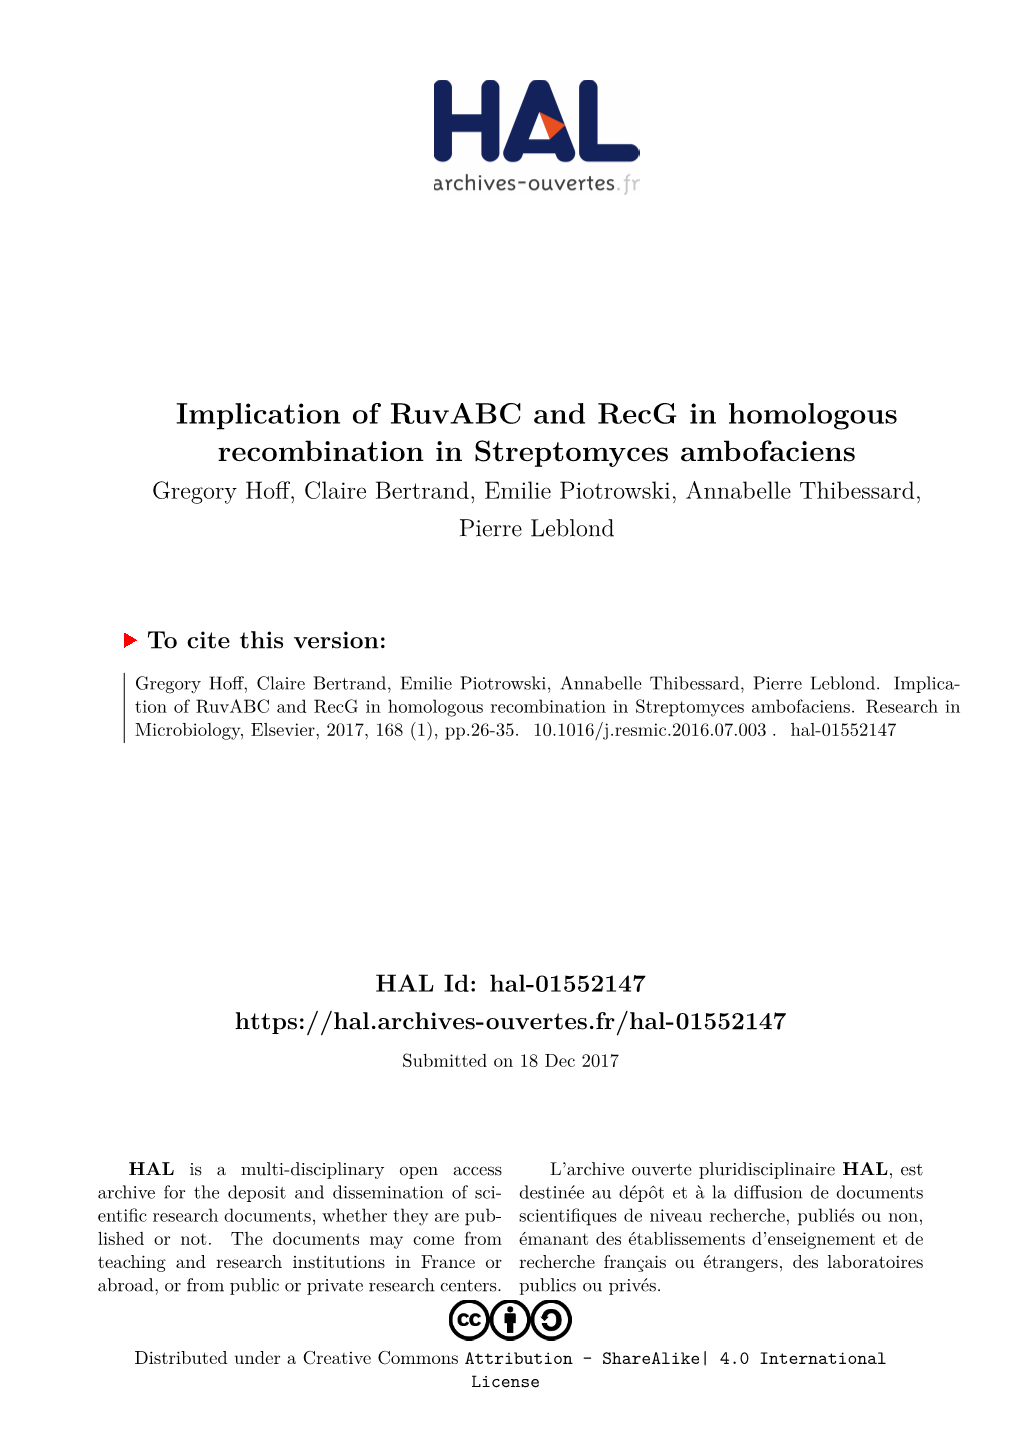 Implication of Ruvabc and Recg in Homologous Recombination In